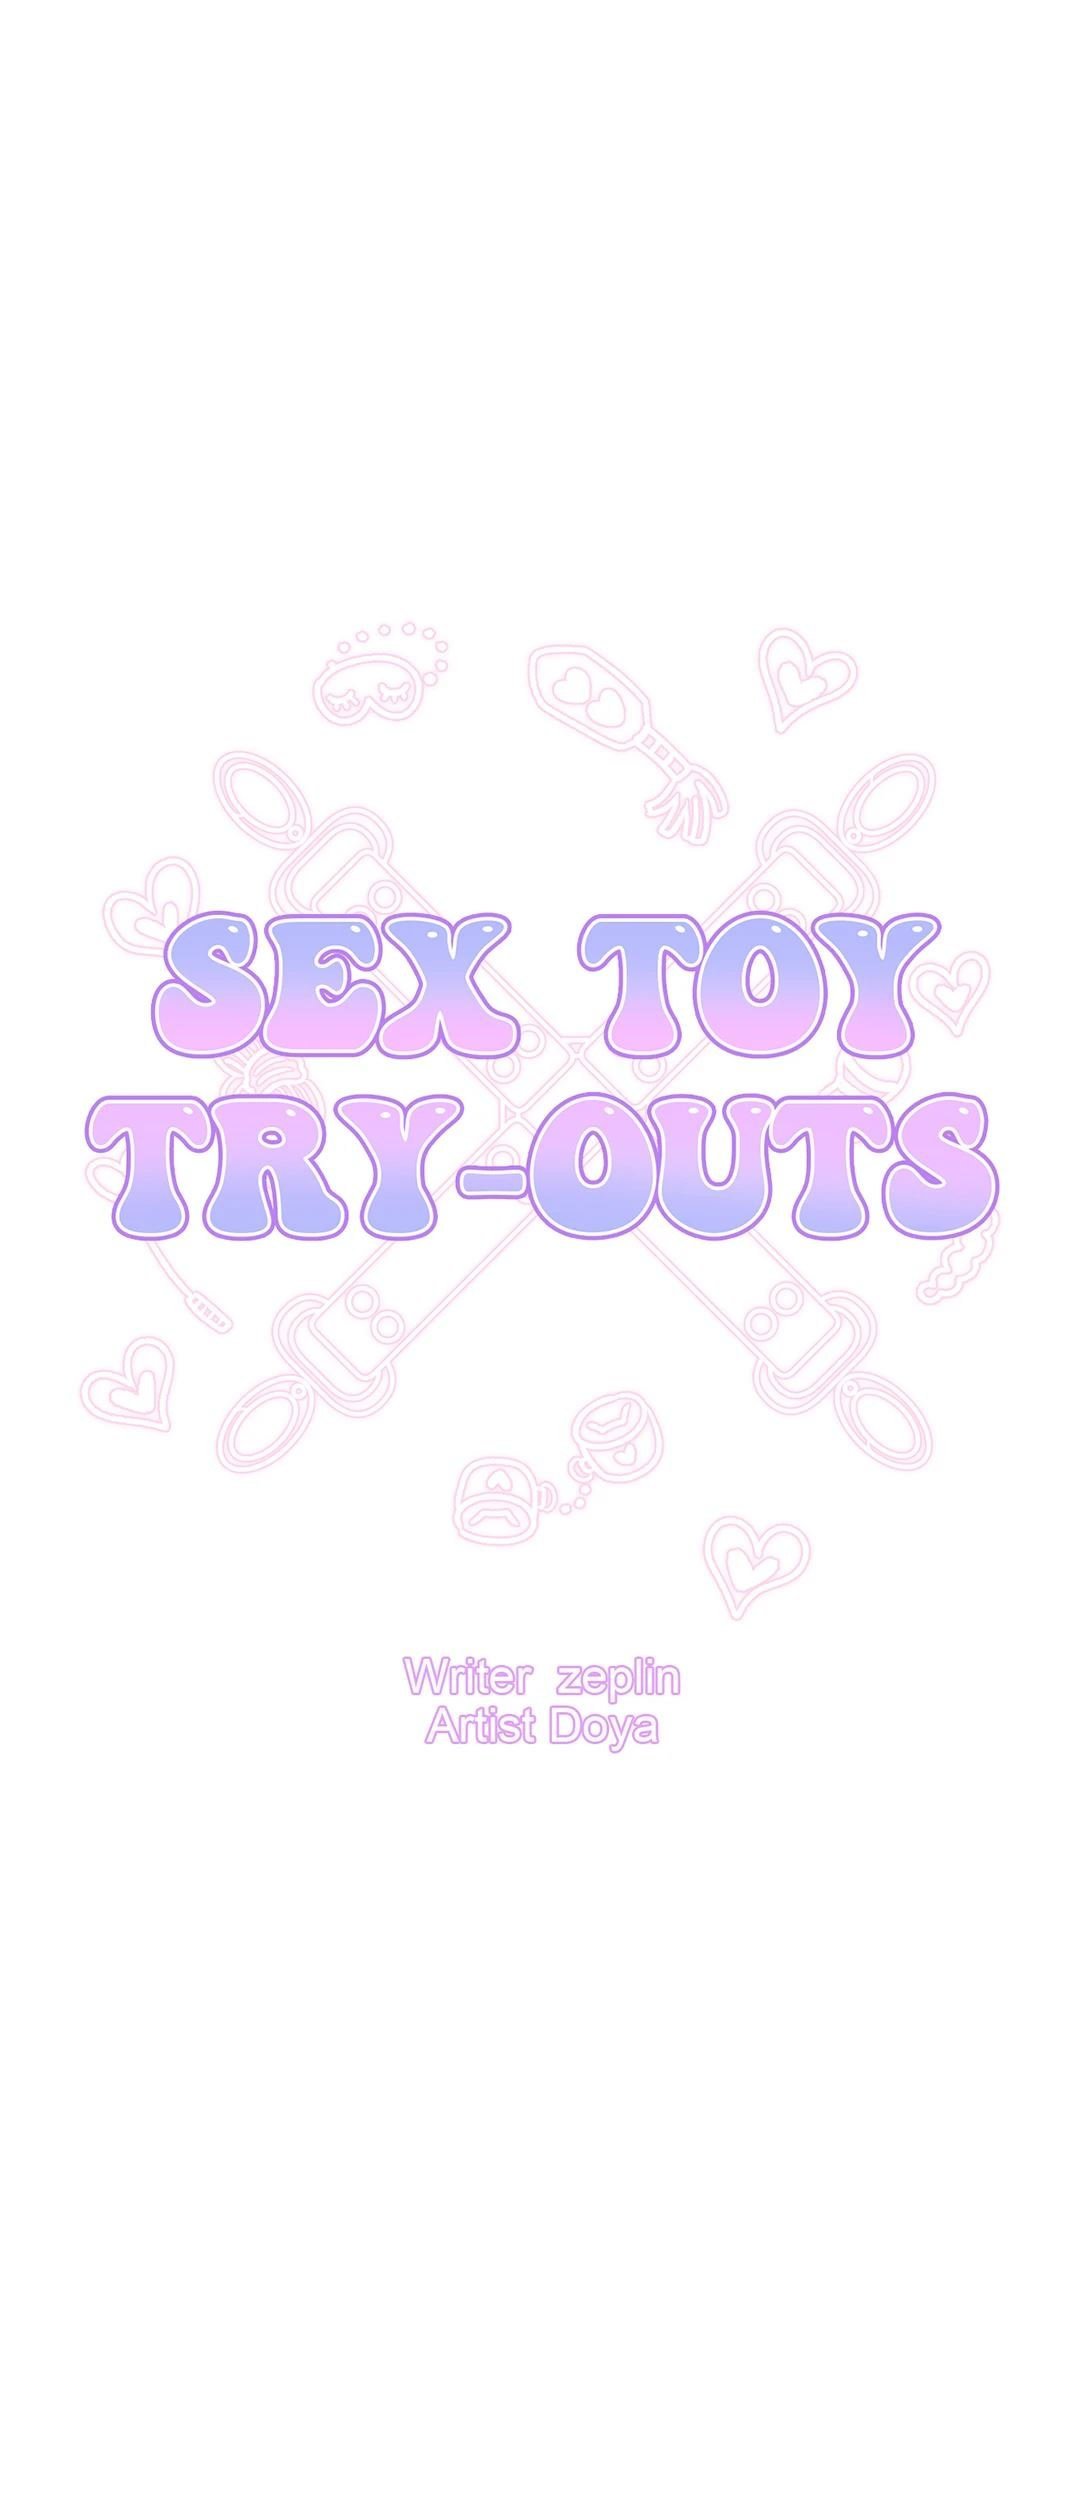 sex-toy-try-outs-chap-24-6